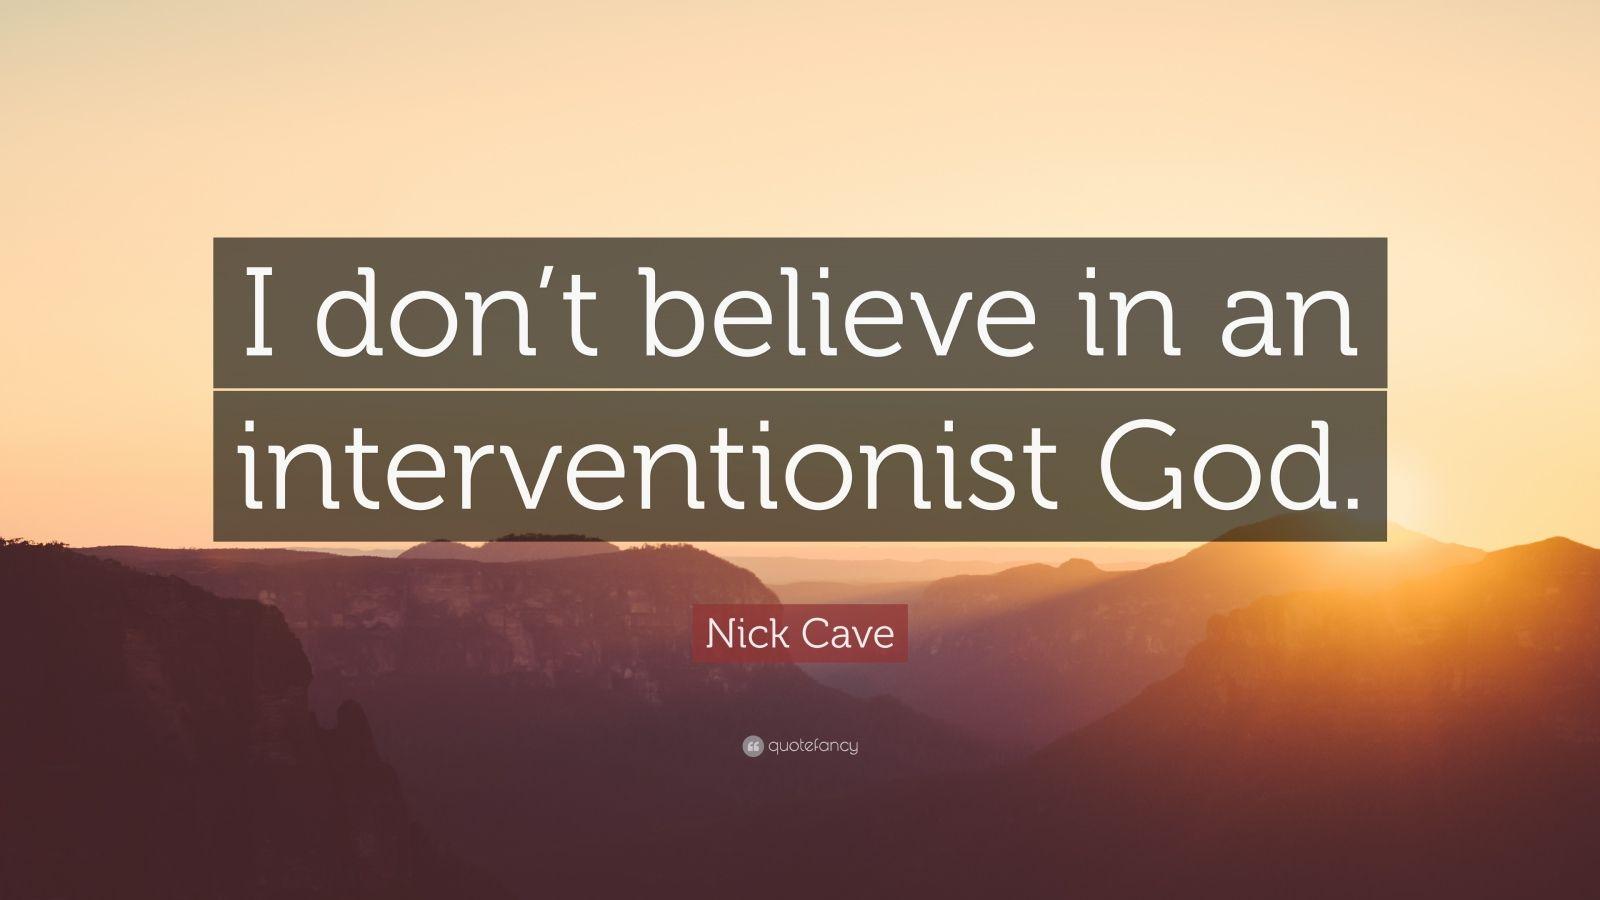 Nick Cave Quote: “I don't believe in an interventionist God.” 5